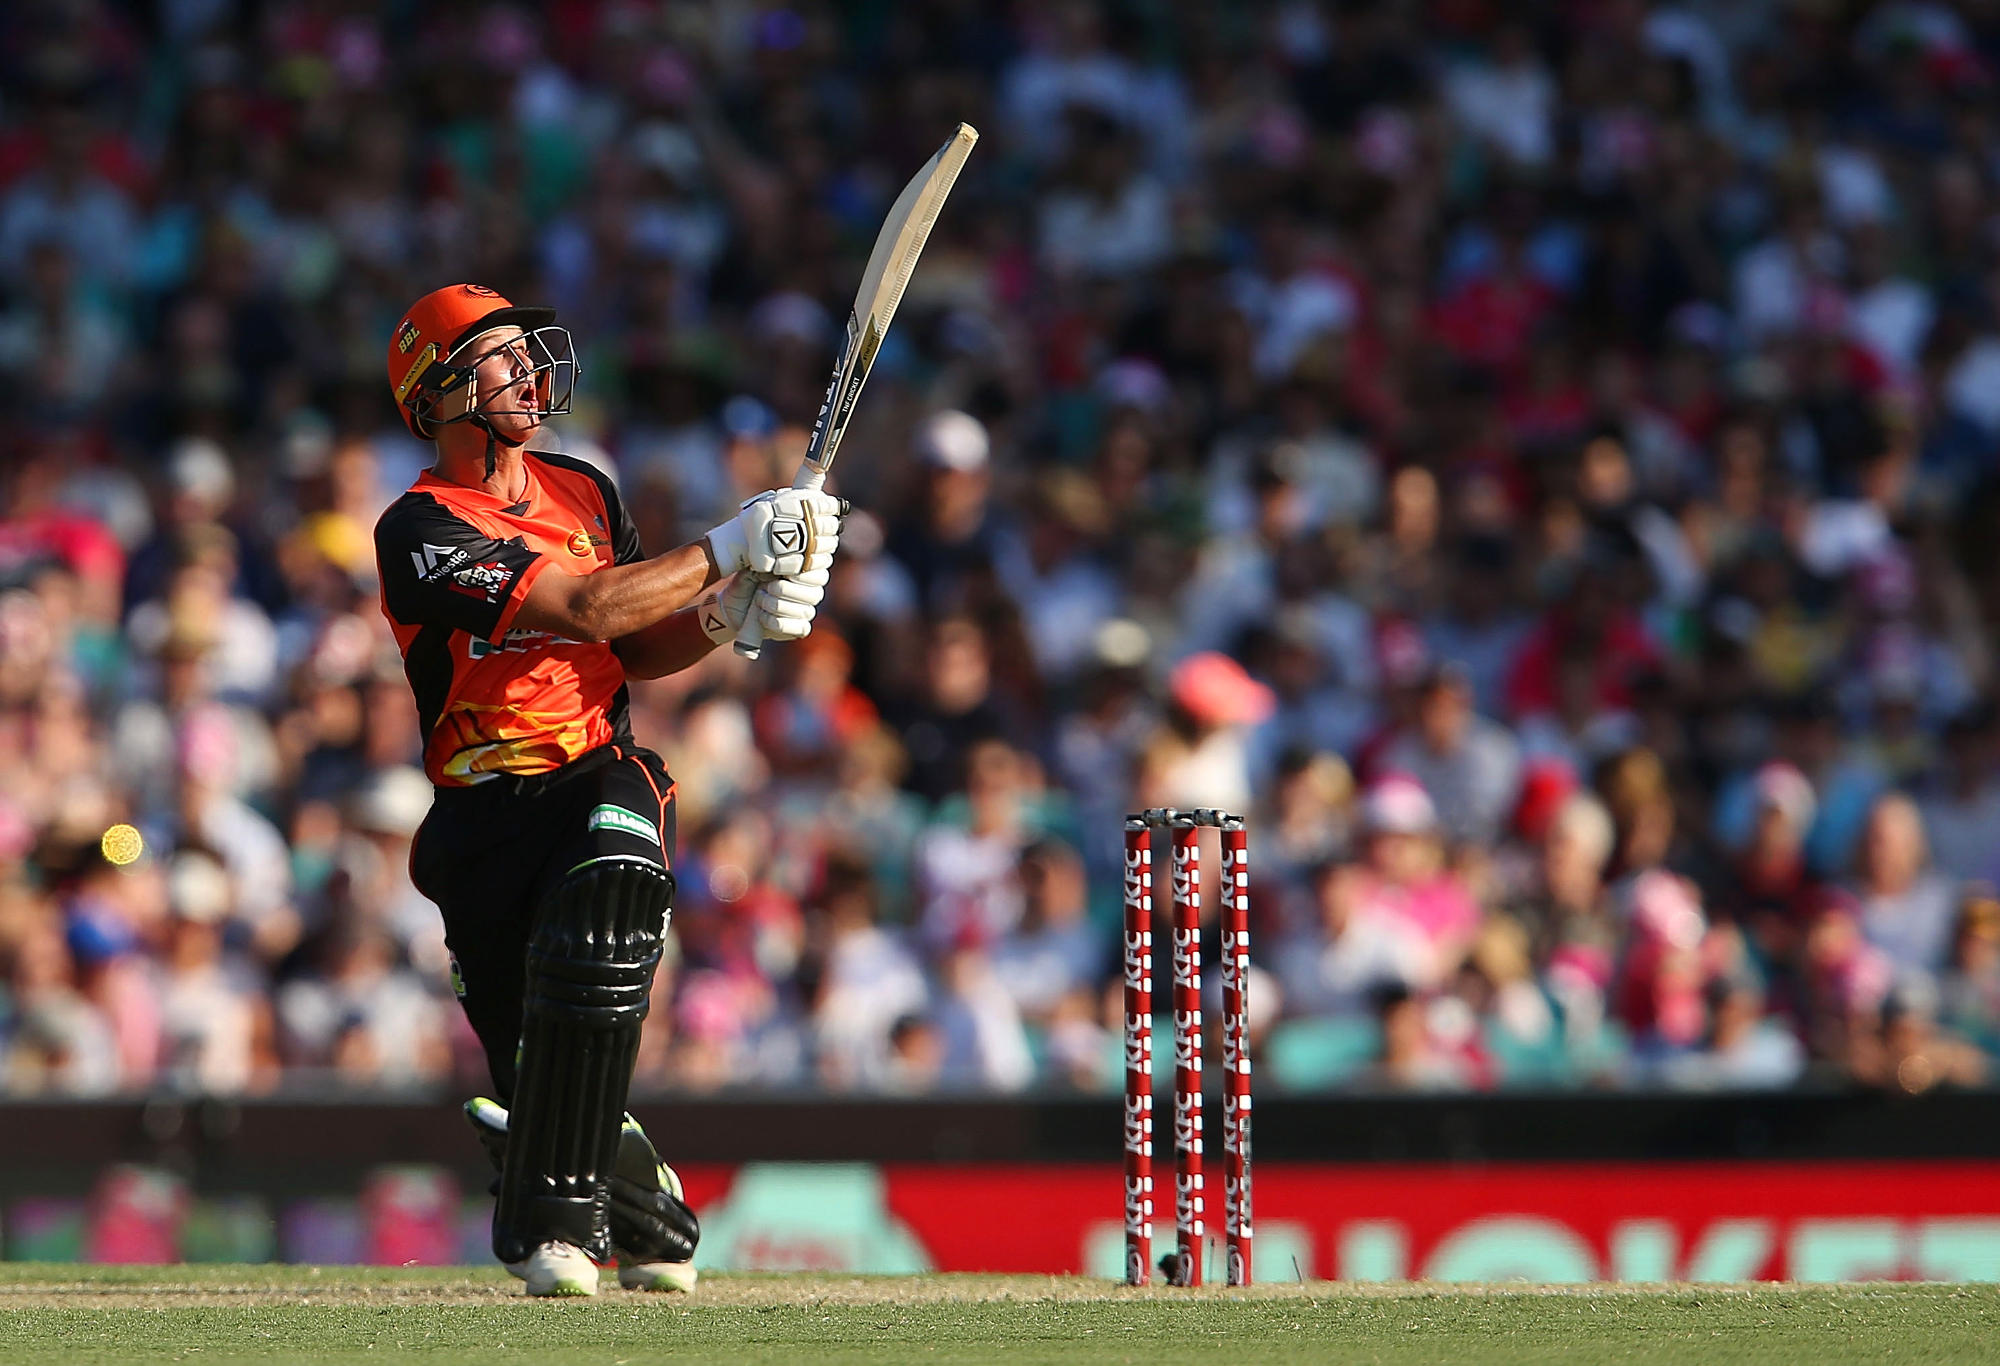 Josh Philippe of the Scorchers bats during the Big Bash League match between the Sydney Sixers and the Perth Scorcher at Sydney Cricket Ground on December 23, 2017 in Sydney, Australia. 